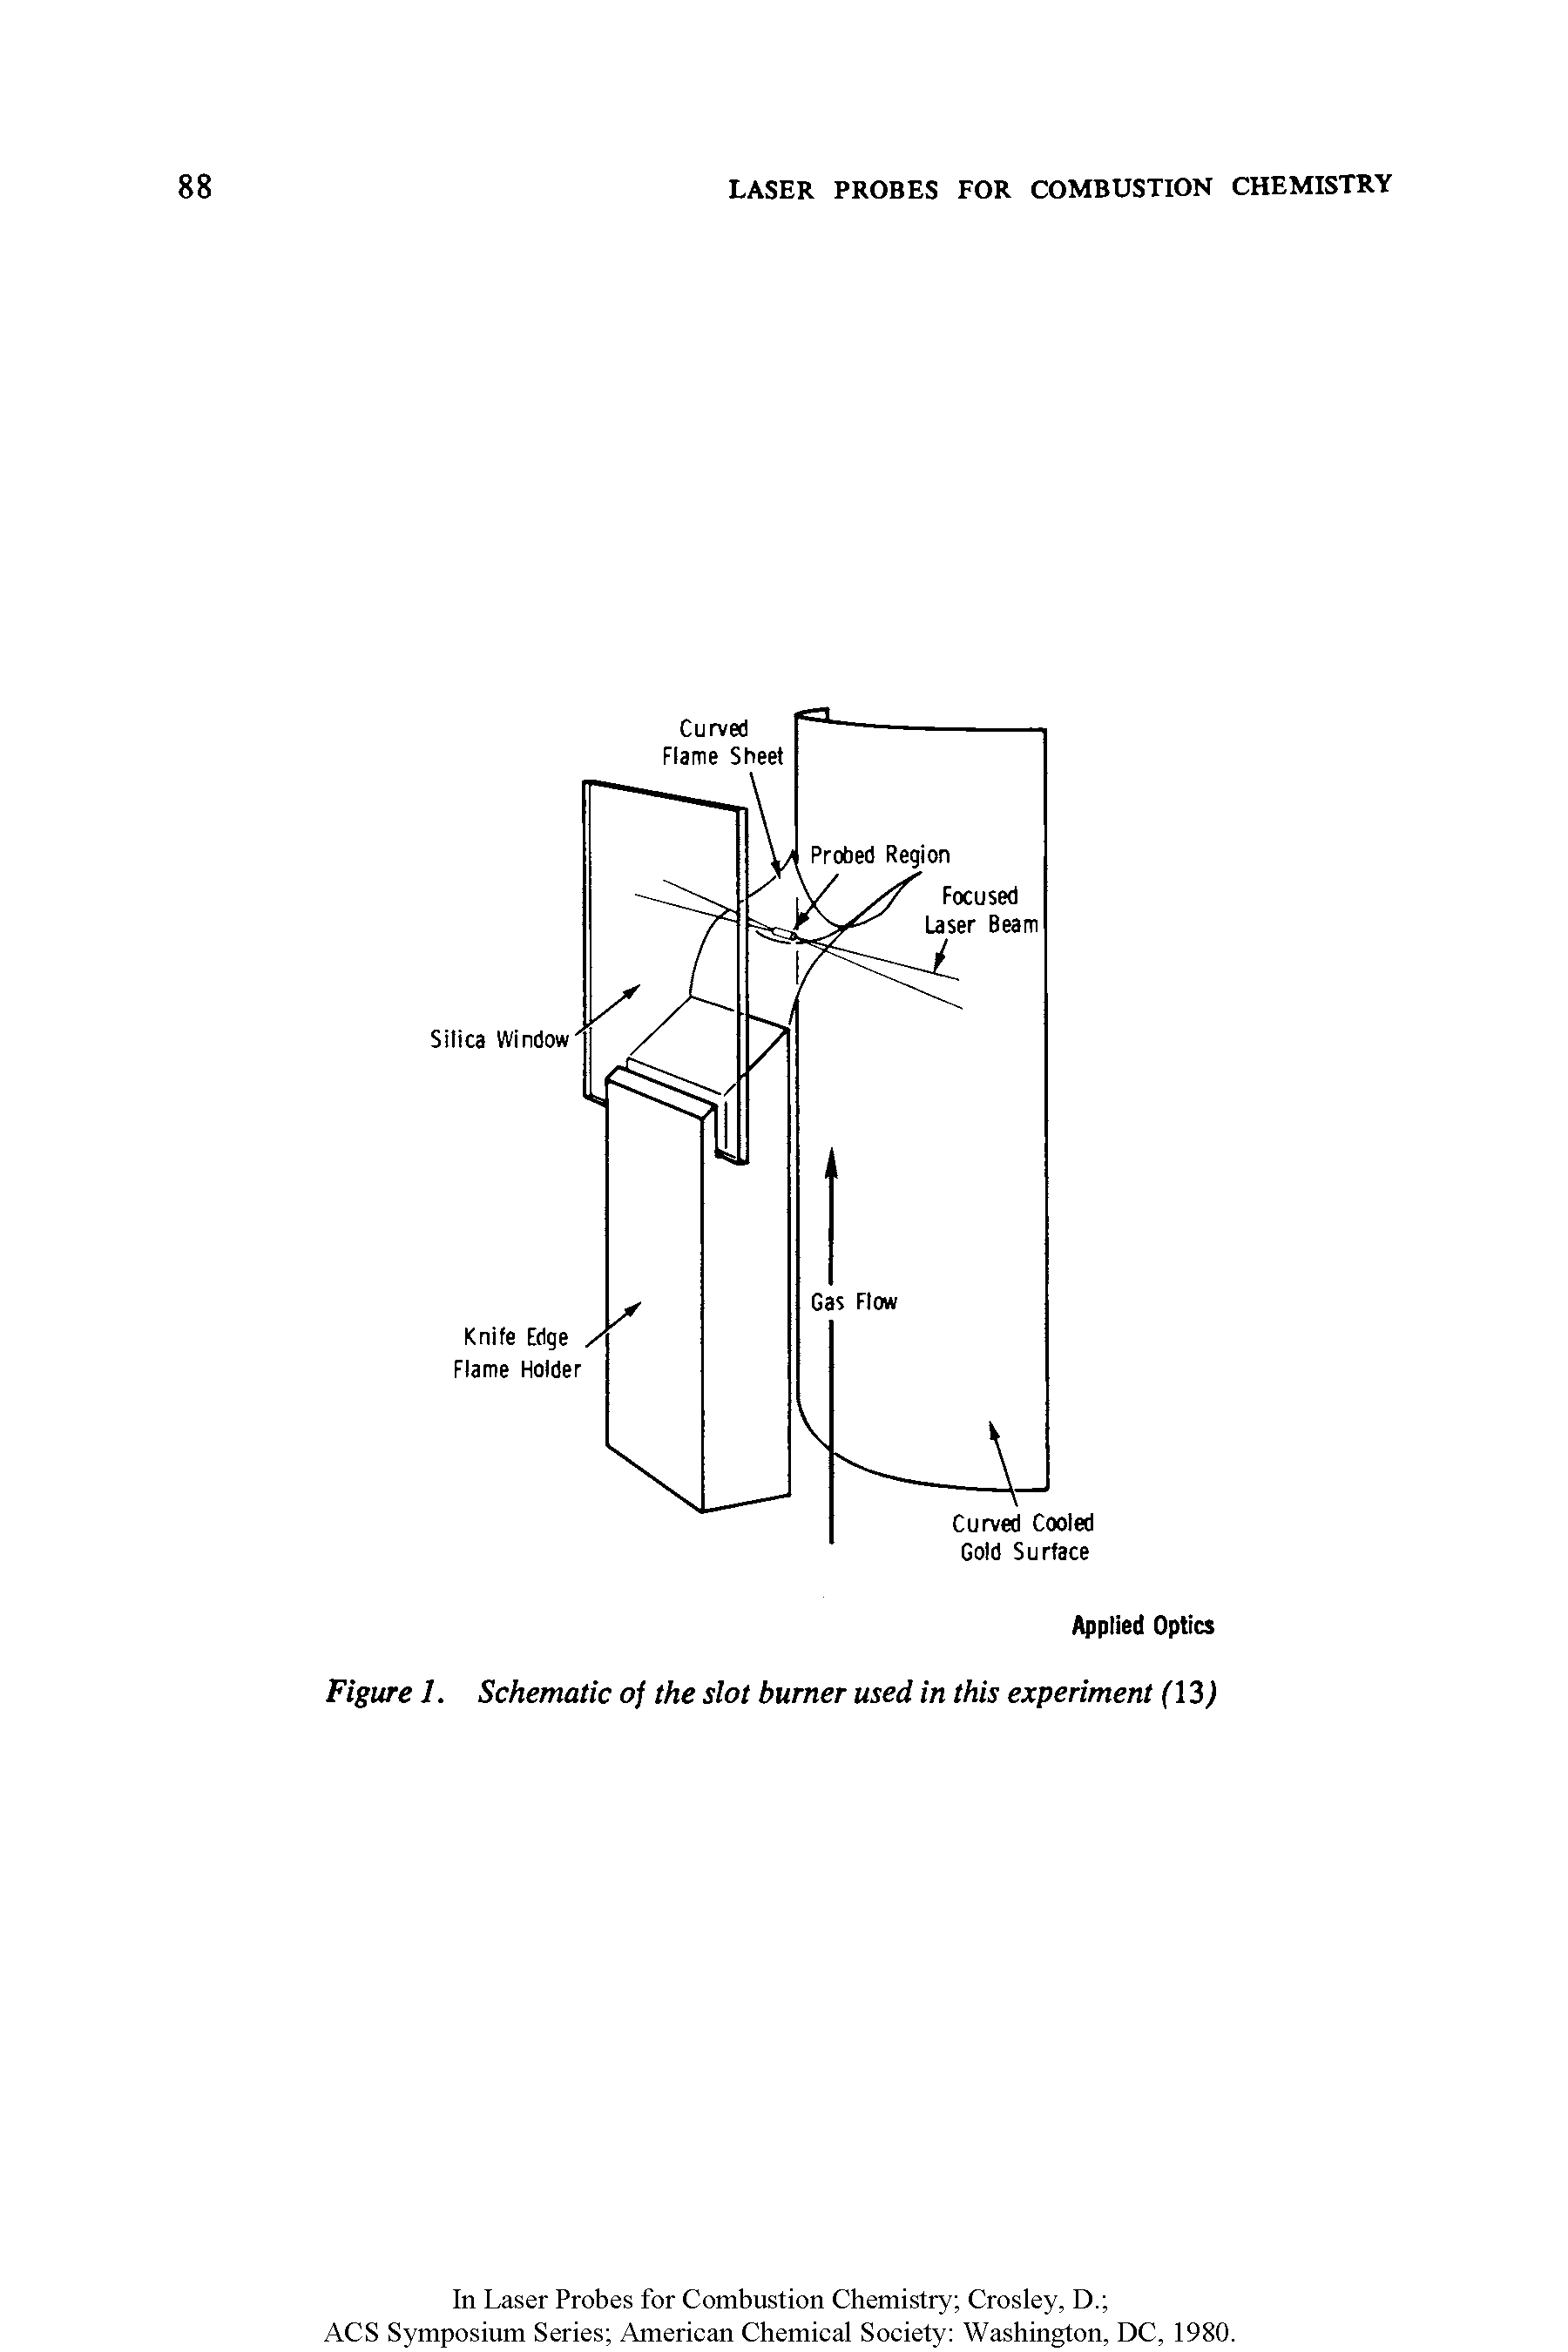 Figure 1. Schematic of the slot burner used in this experiment (13)...